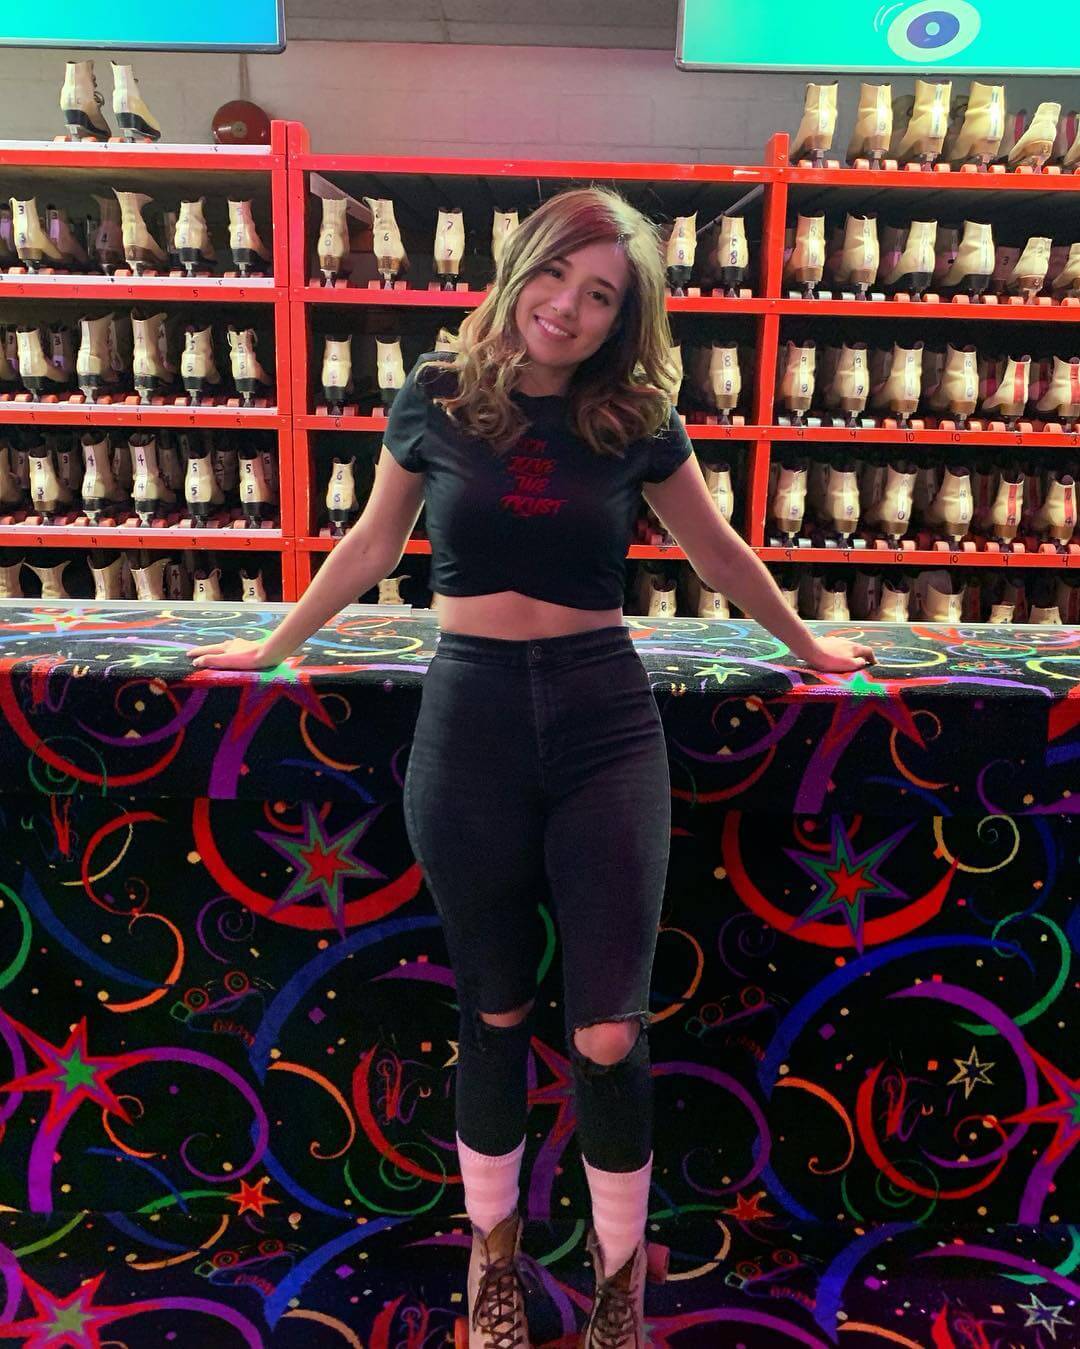 45+ Sexy Pokimane Feet Pictures Will Make You Go Crazy For This Babe | Best Of Comic Books